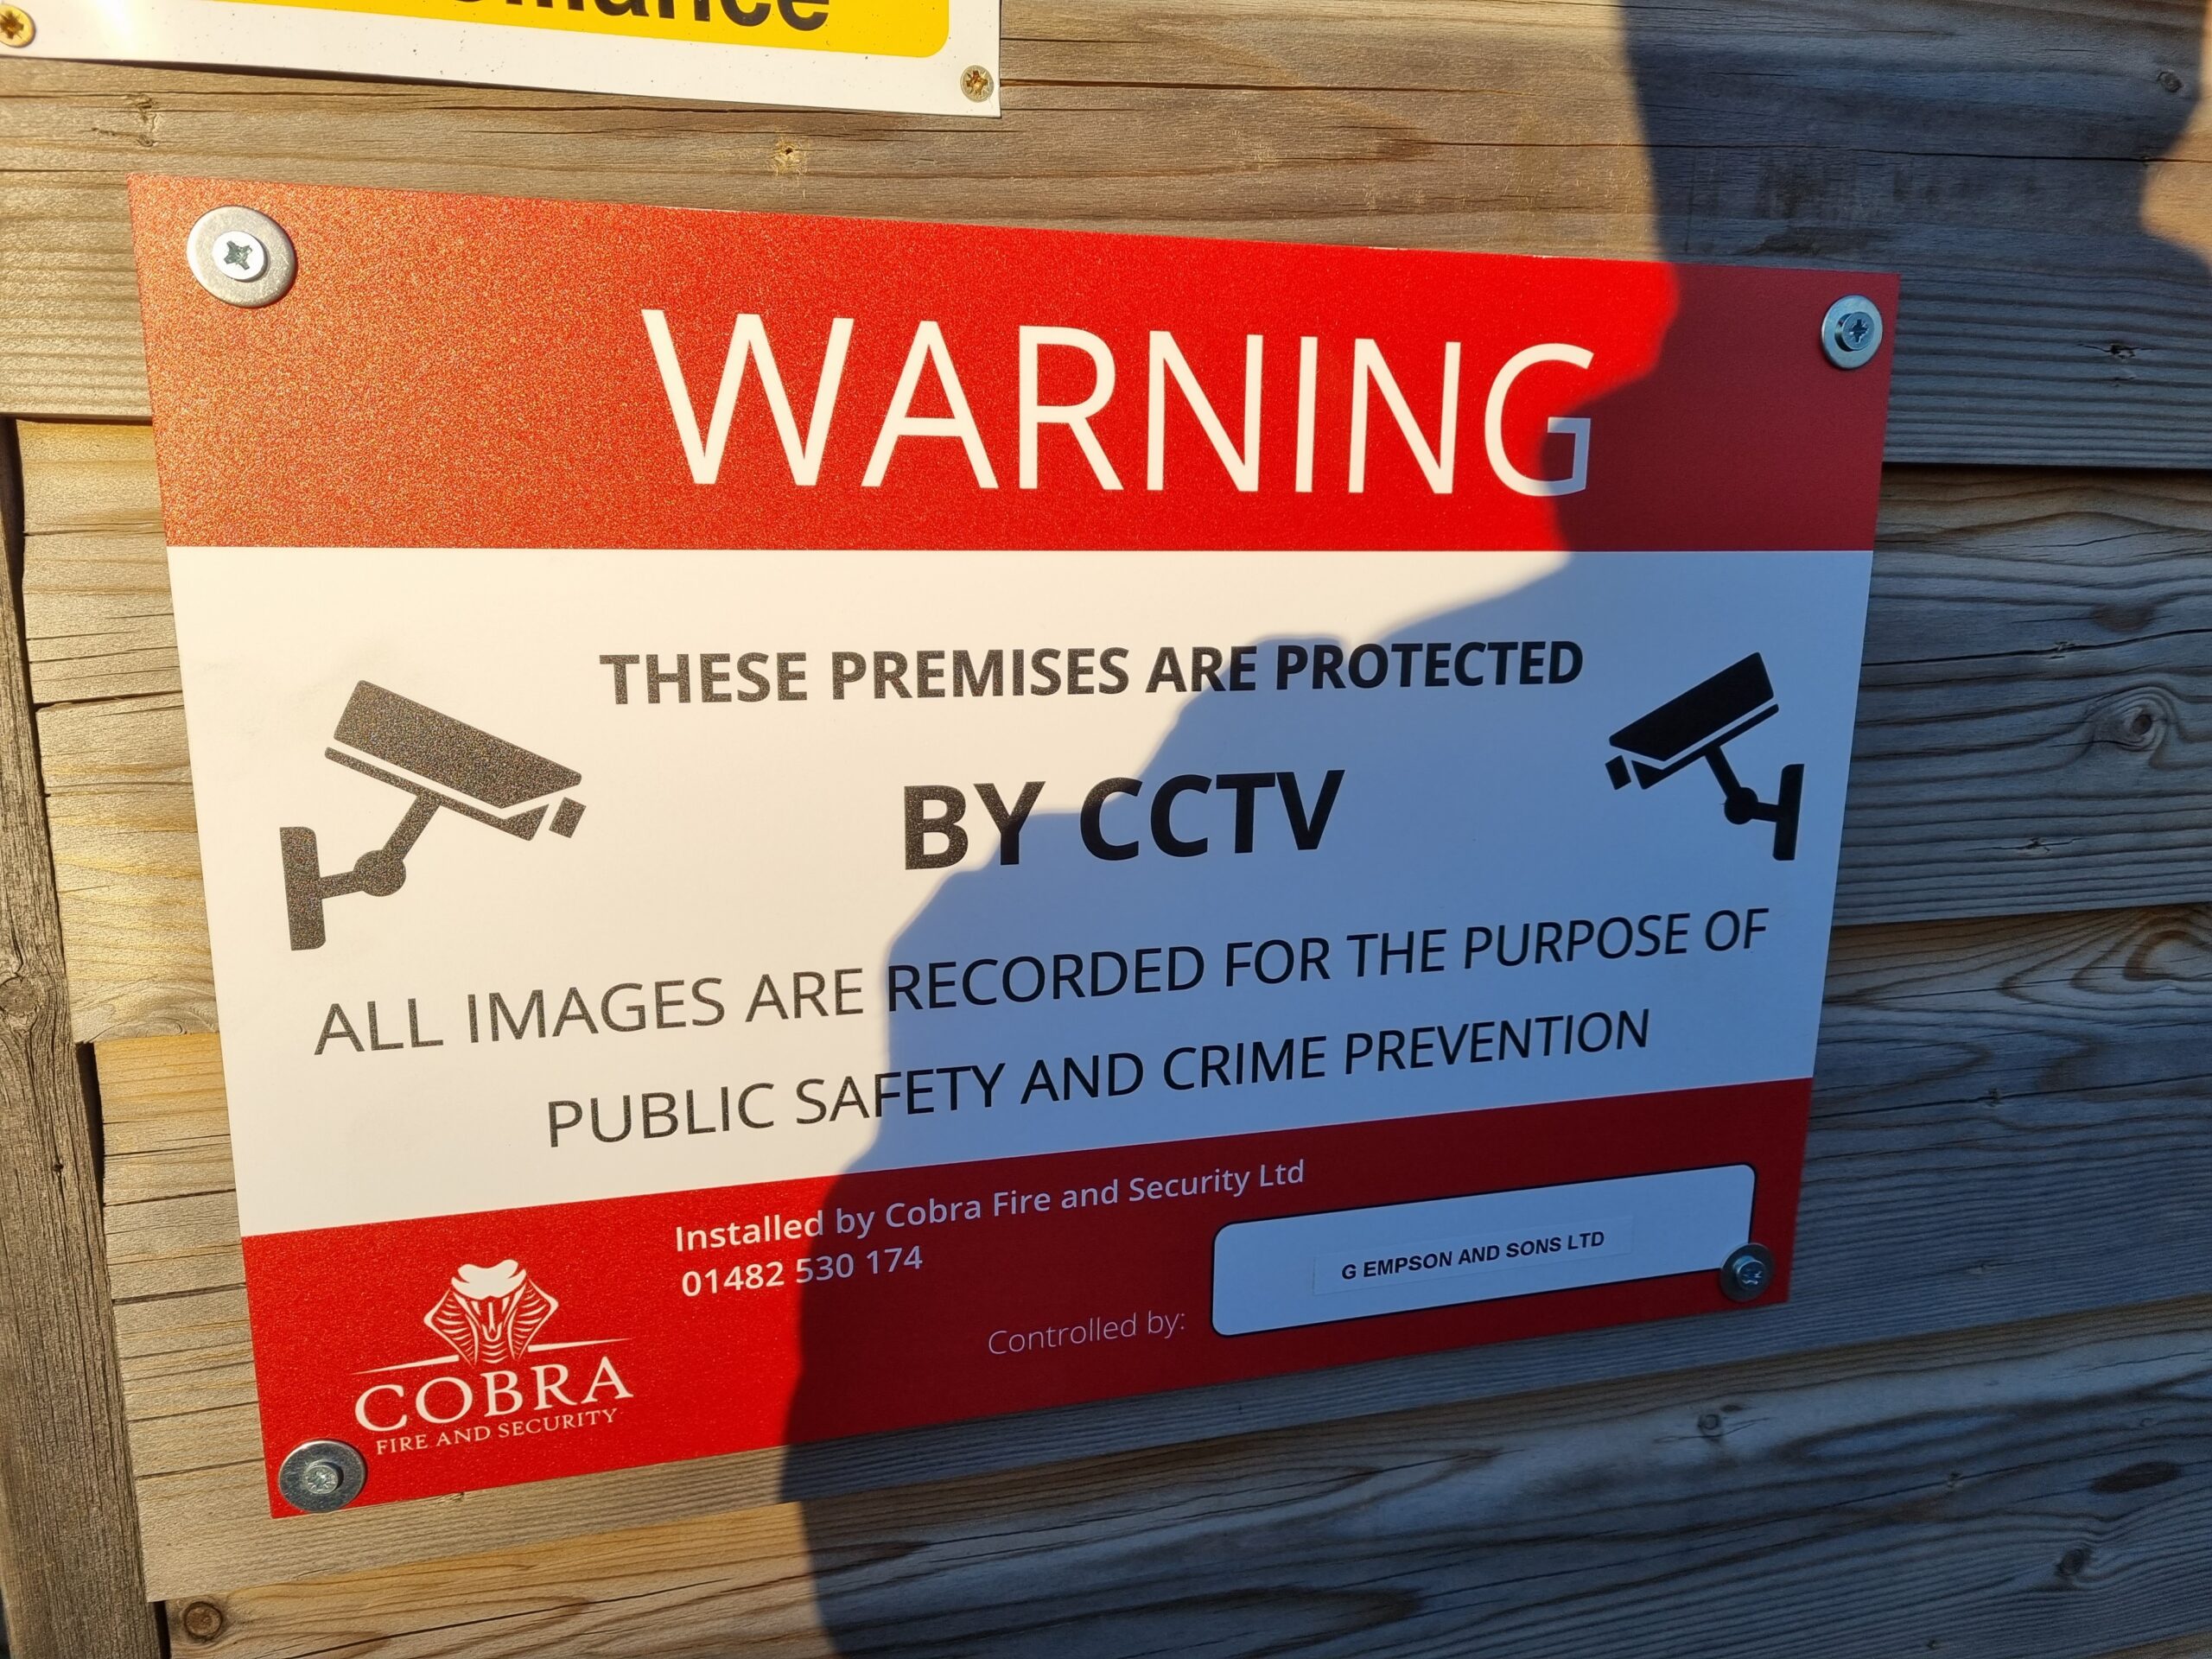 CCTV Signage mounted on a wooden wall